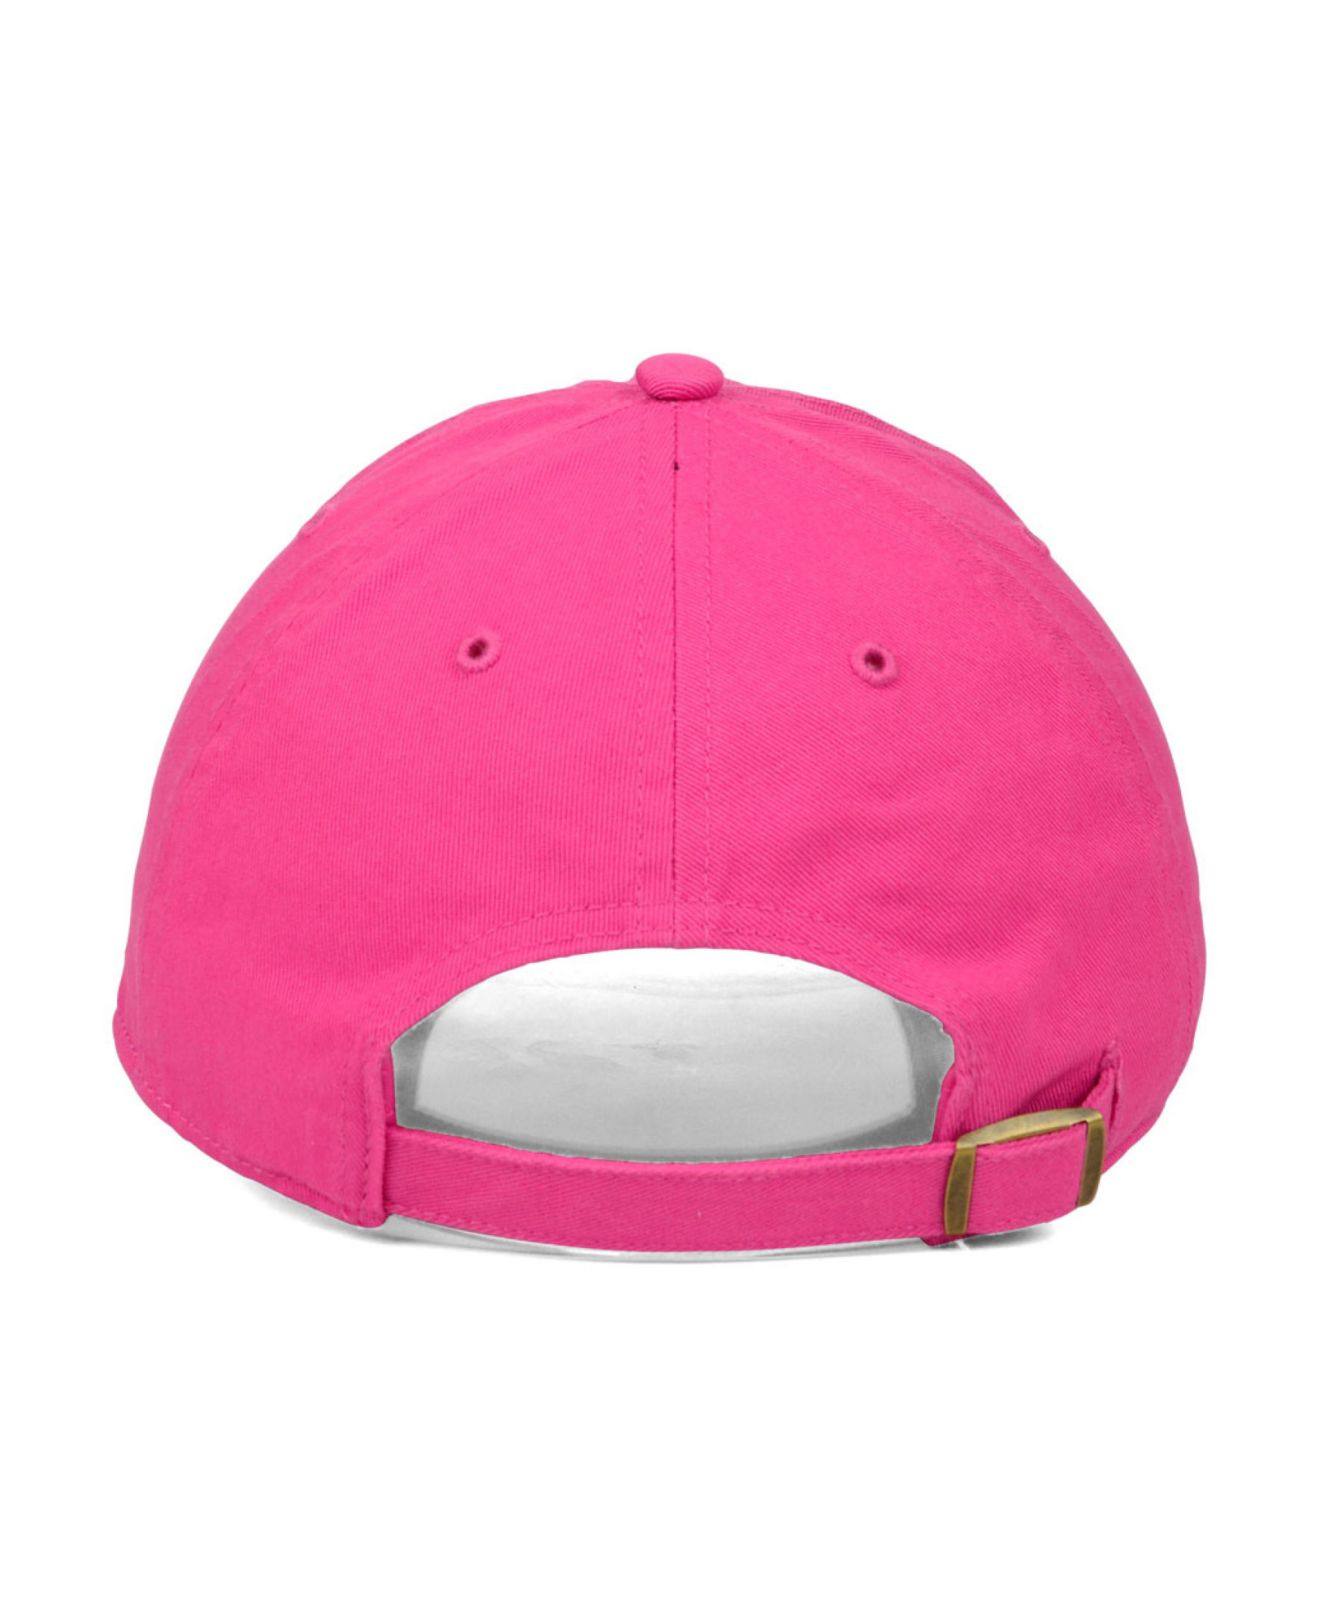 pink boston bruins,Save up to 16%,www.ilcascinone.com